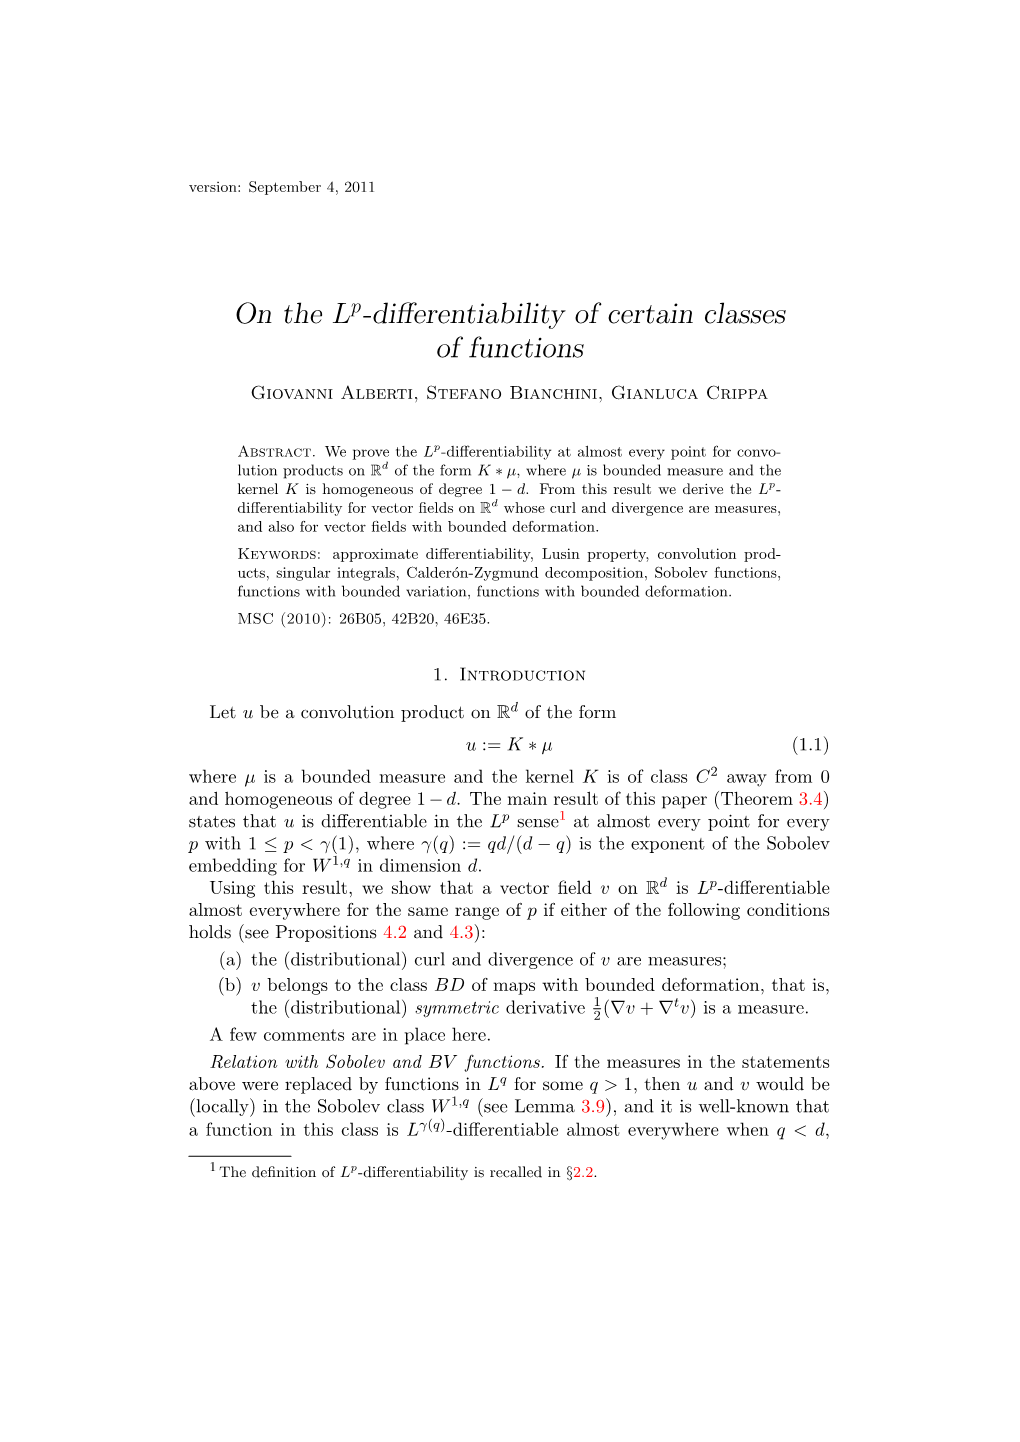 On the Lp-Differentiability of Certain Classes of Functions